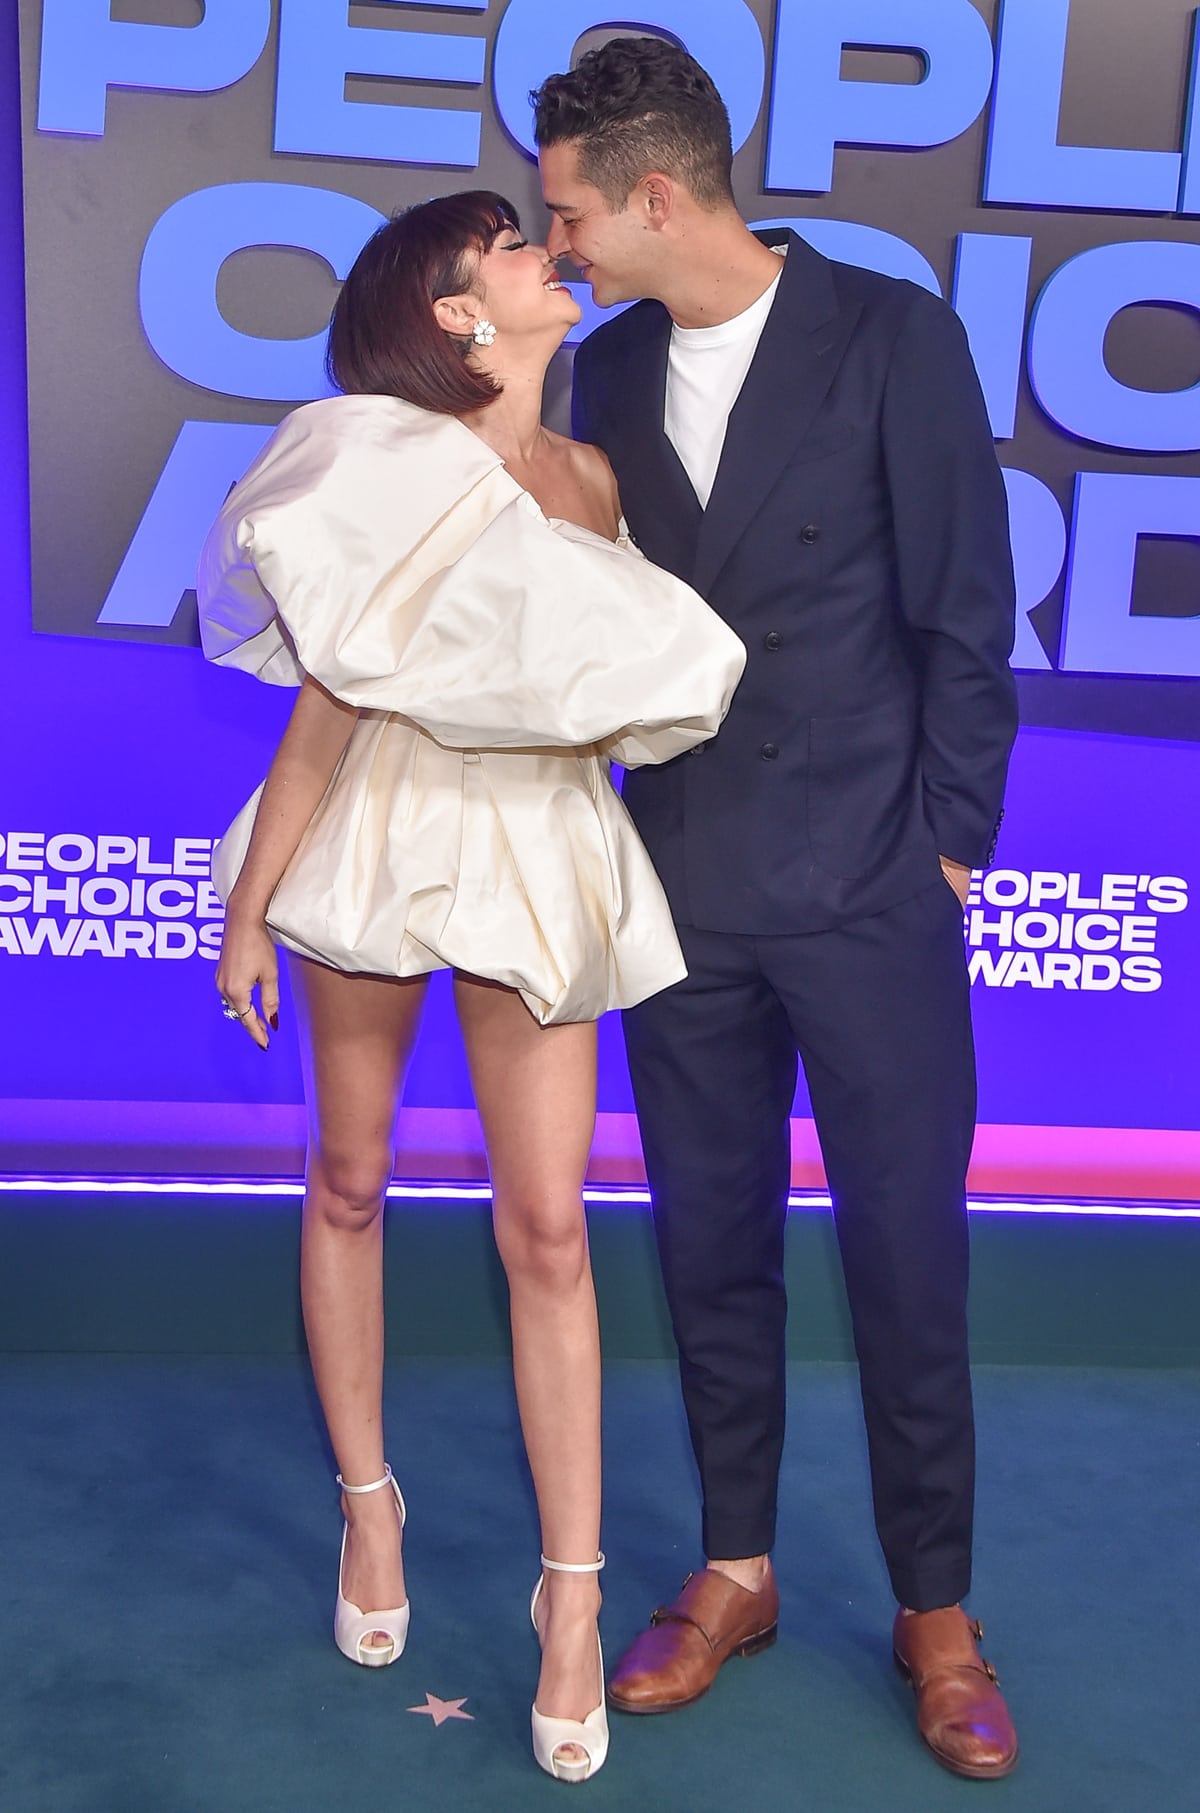 Sarah Hyland in a Vera Wang dress kisses her much taller fiancé Wells Adams at the 2021 E! People’s Choice Awards